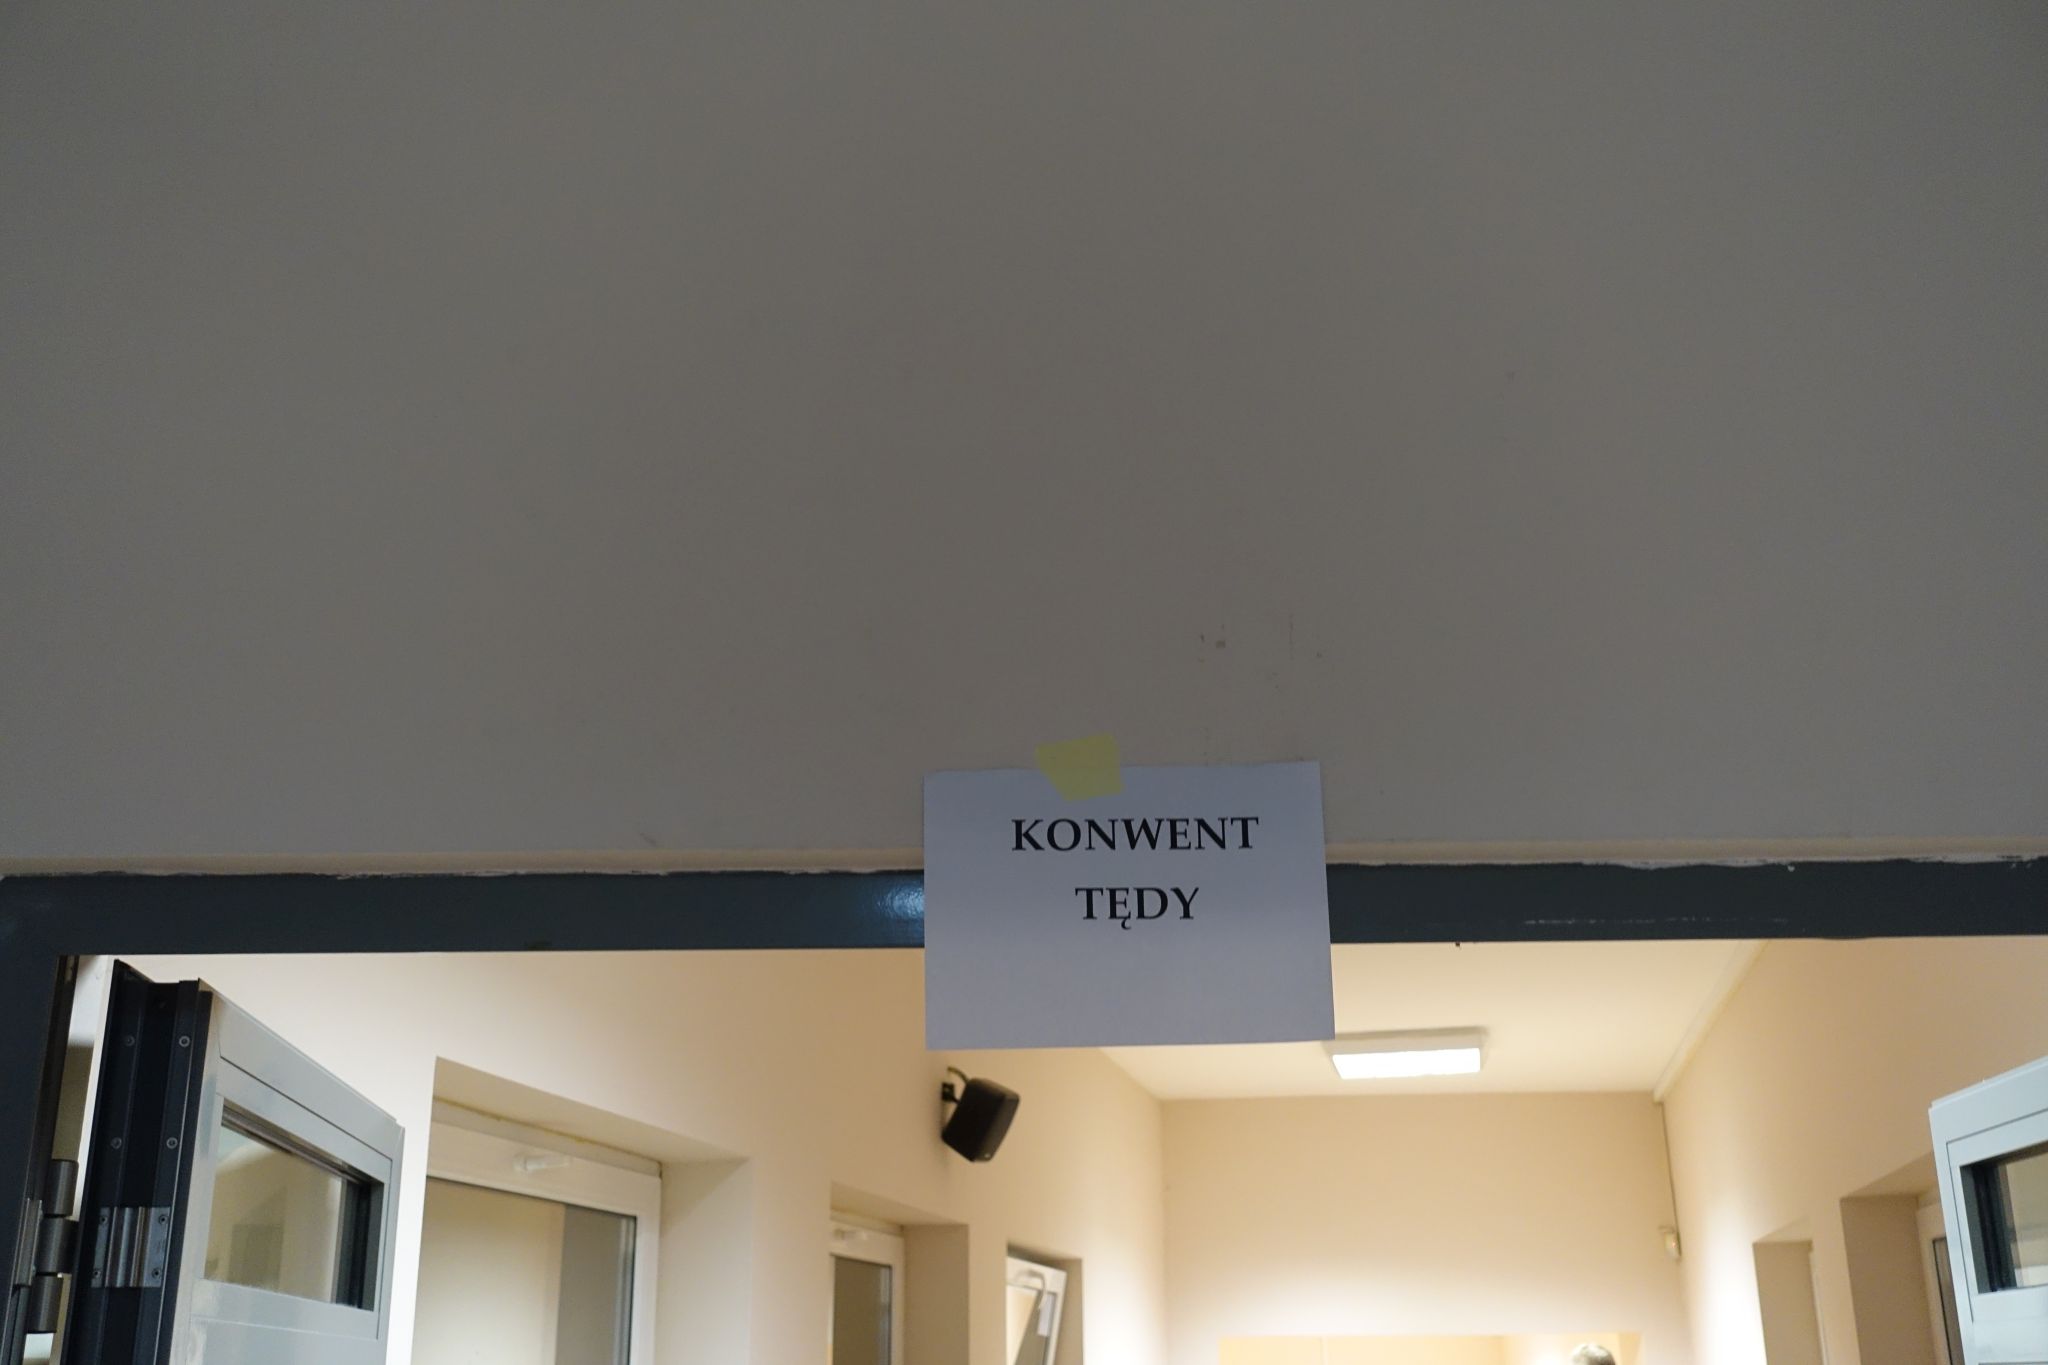 A piece of paper is glued on top of the door. It has a 'Konwent tędy' inscription.